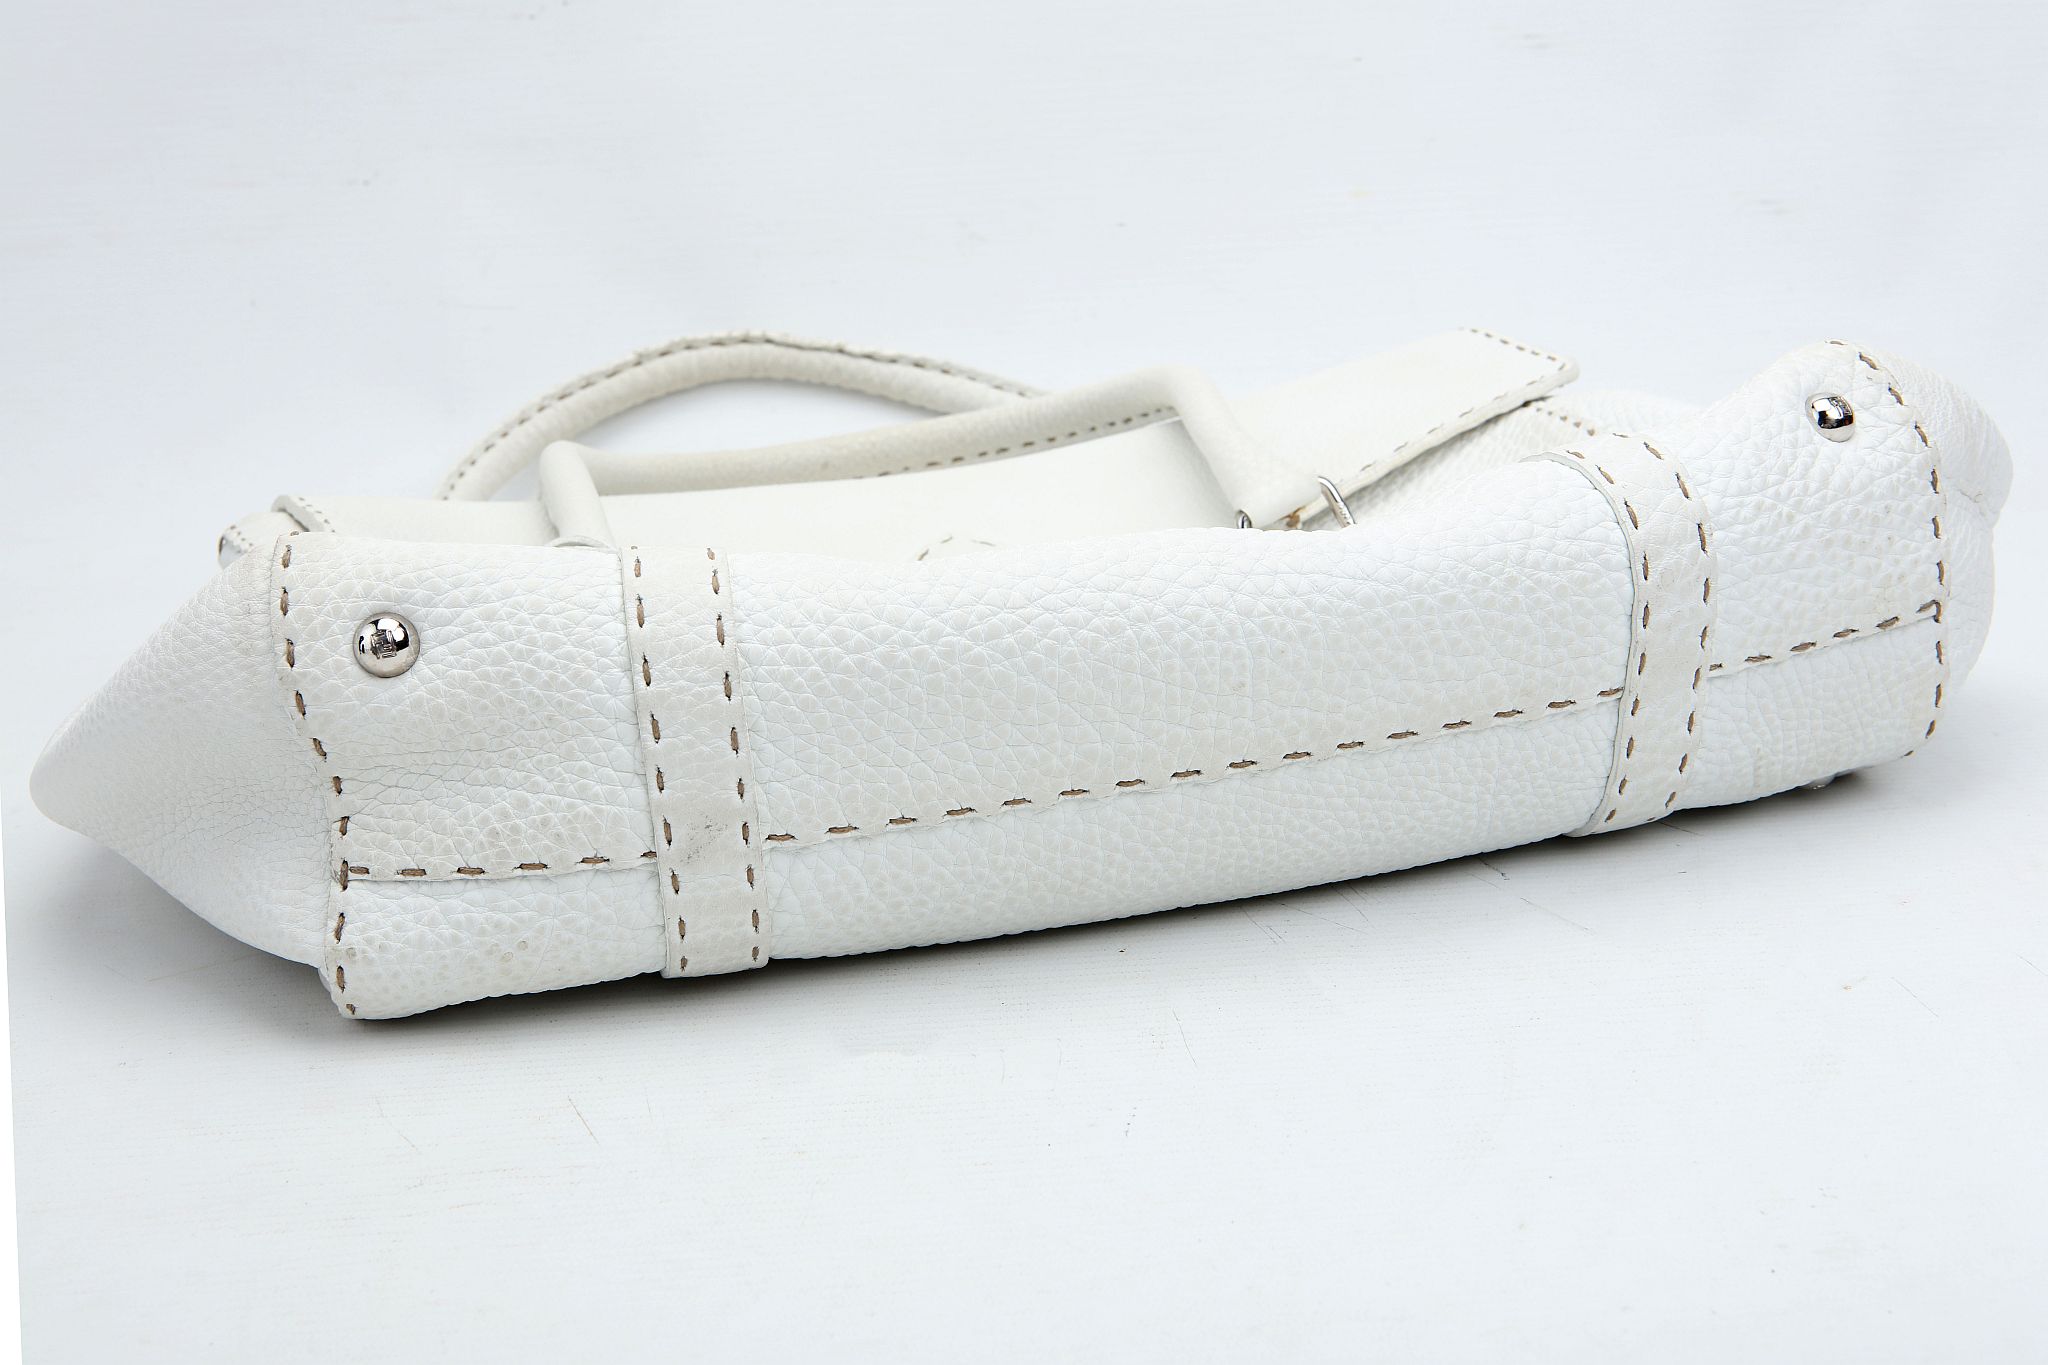 FENDI SELLERIA SHOULDER BAG, white stitched leather with silver tone hardware, 35cm wide, 30cm high, - Image 7 of 12